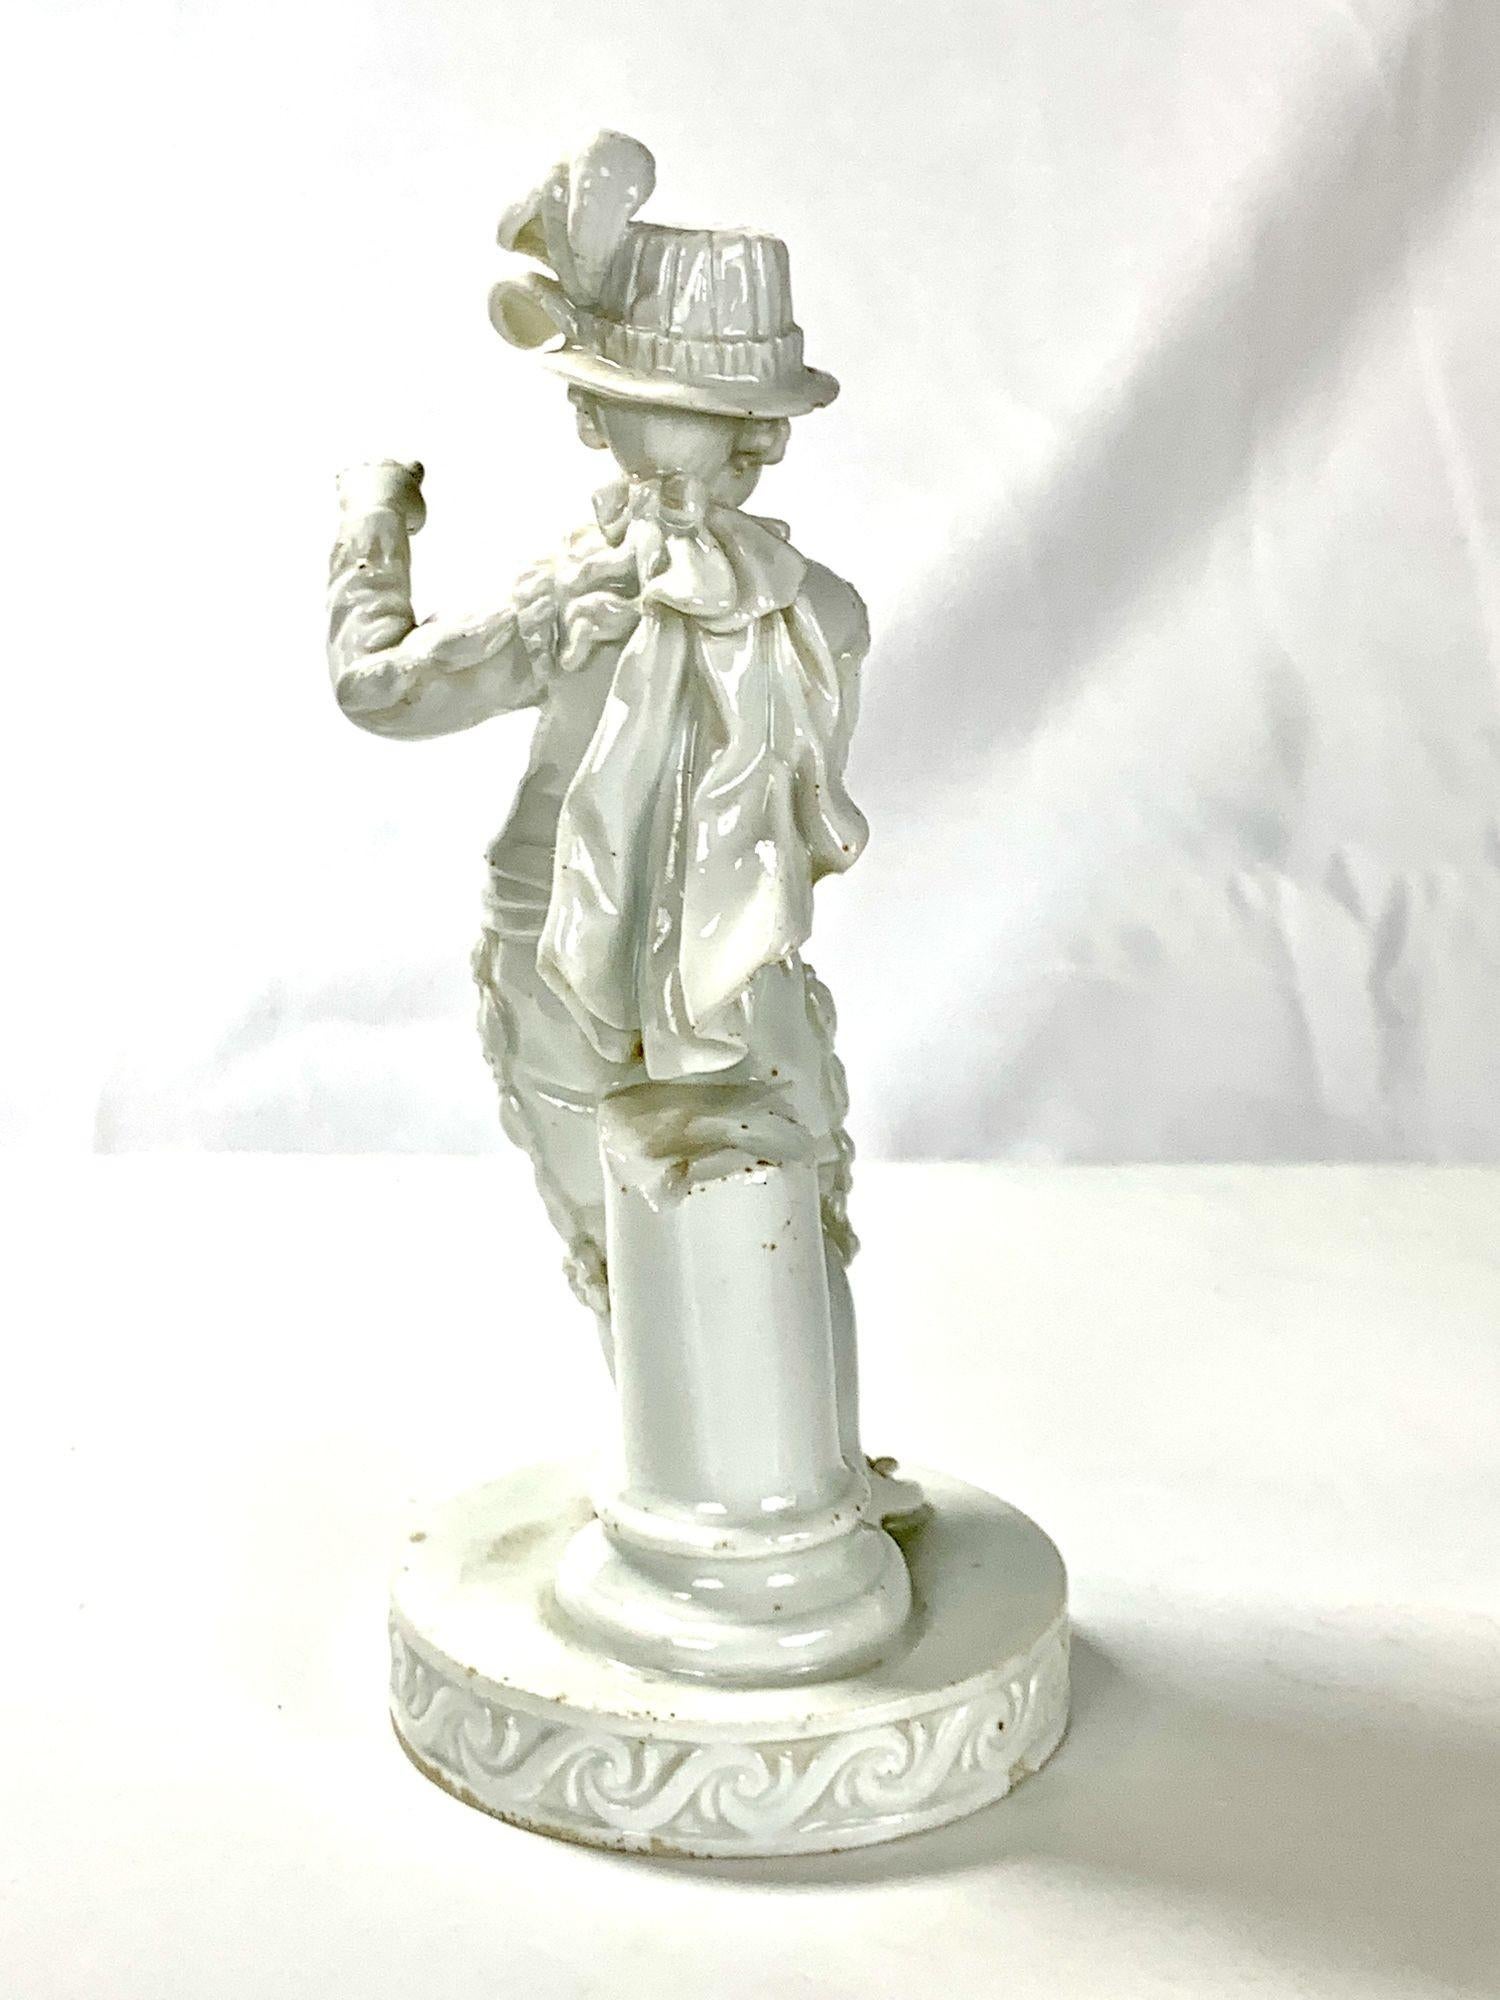 Real Tennis Porcelain Figure Germany Circa 1820 In Excellent Condition For Sale In Katonah, NY